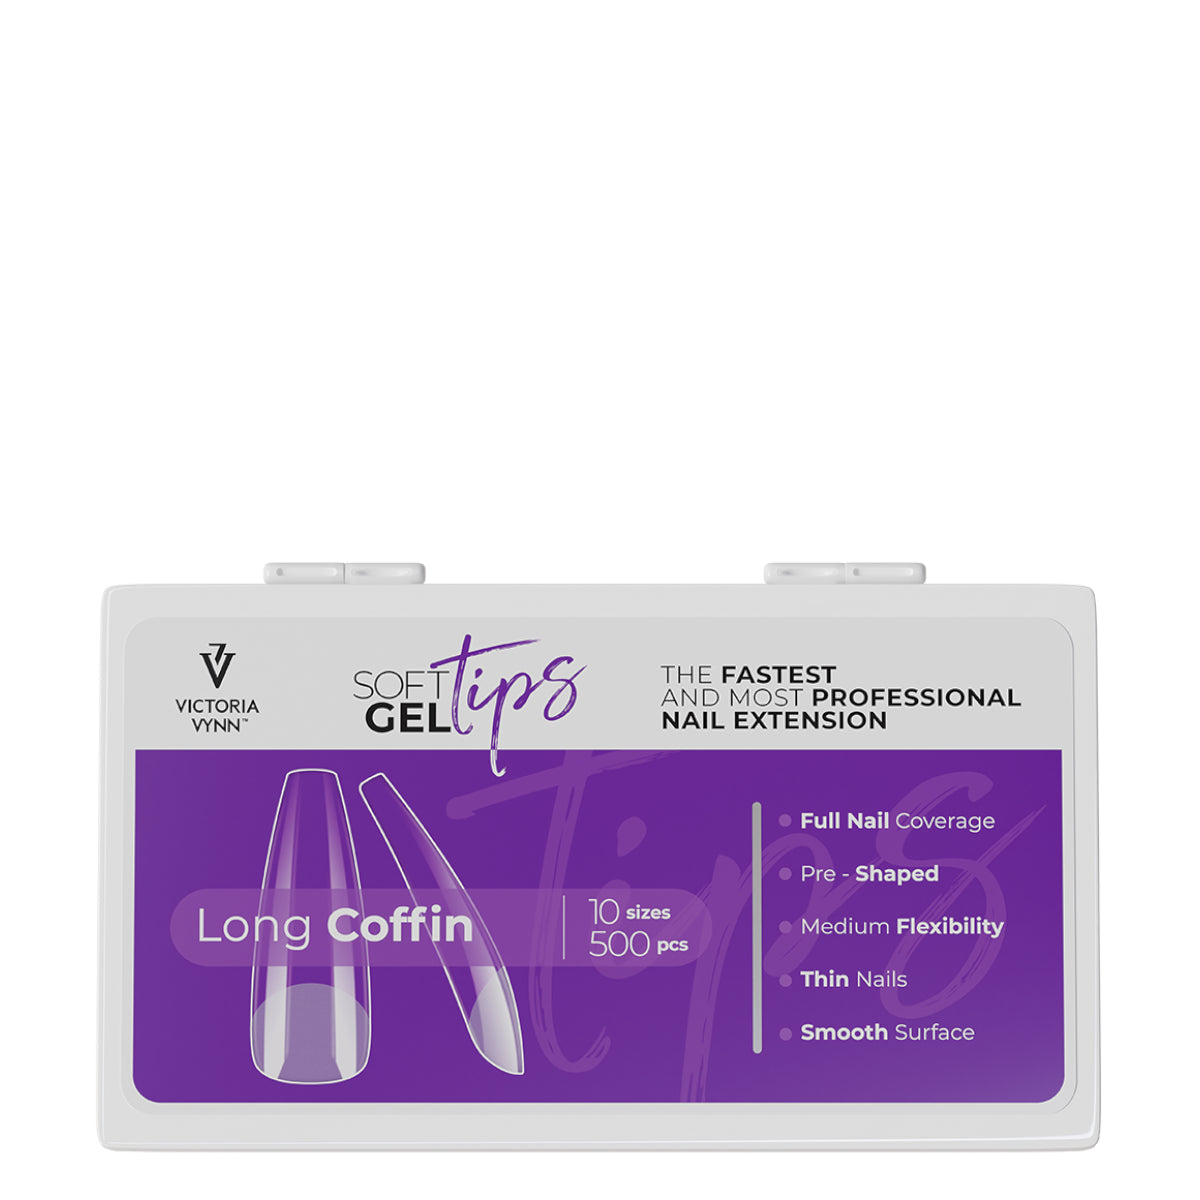 Victoria Vynn Soft Gel Tips Long Coffin Complete Kit with LED Lamp Tips - Roxie Cosmetics